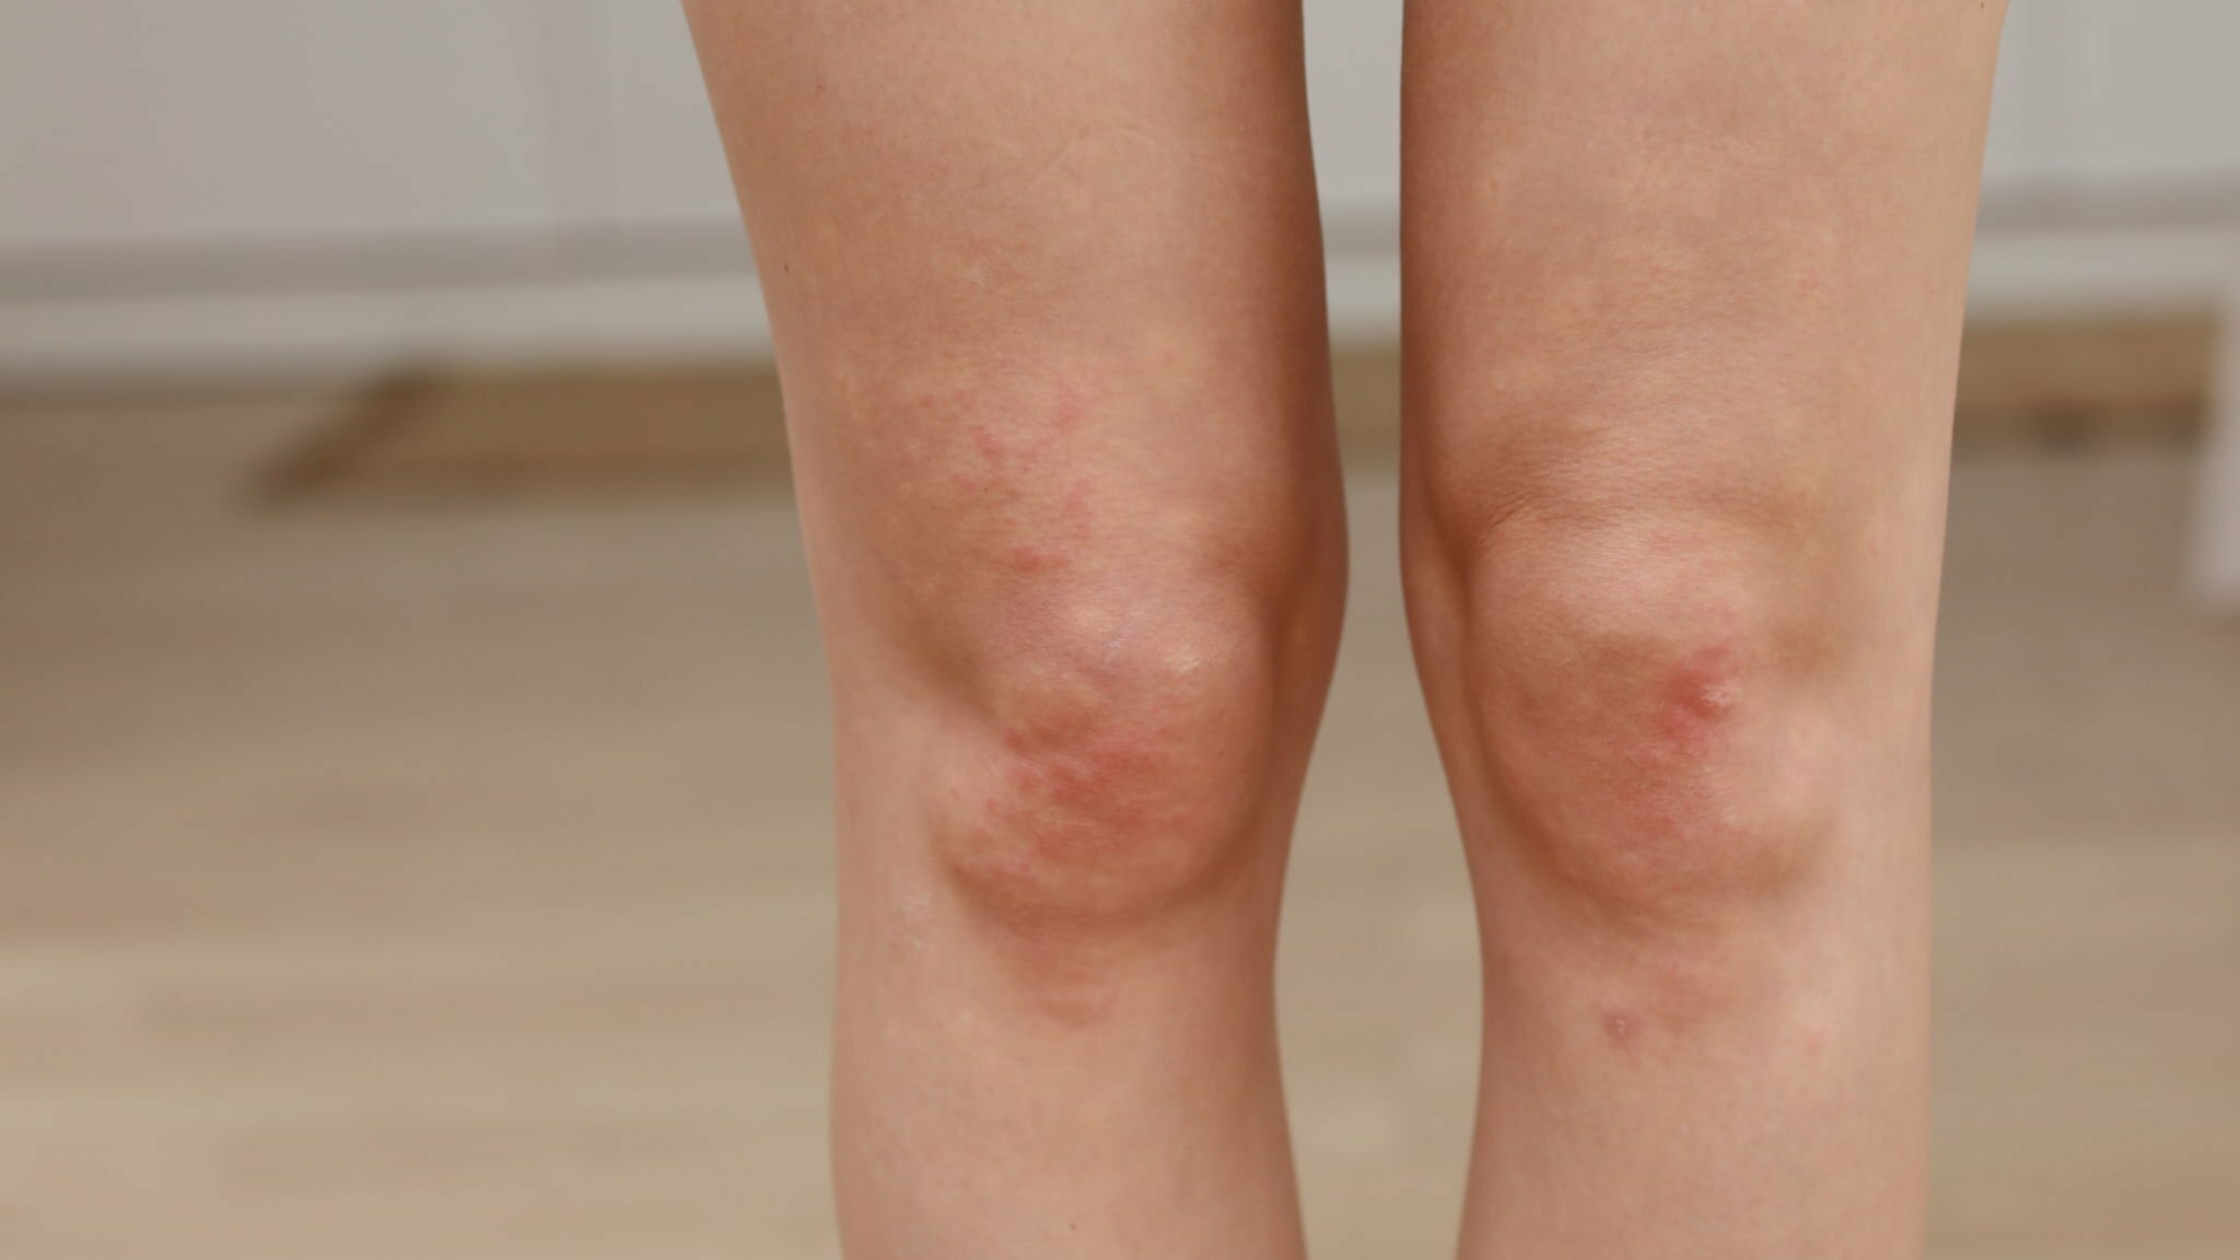 How to Prevent Staph Infections When You Have Eczema